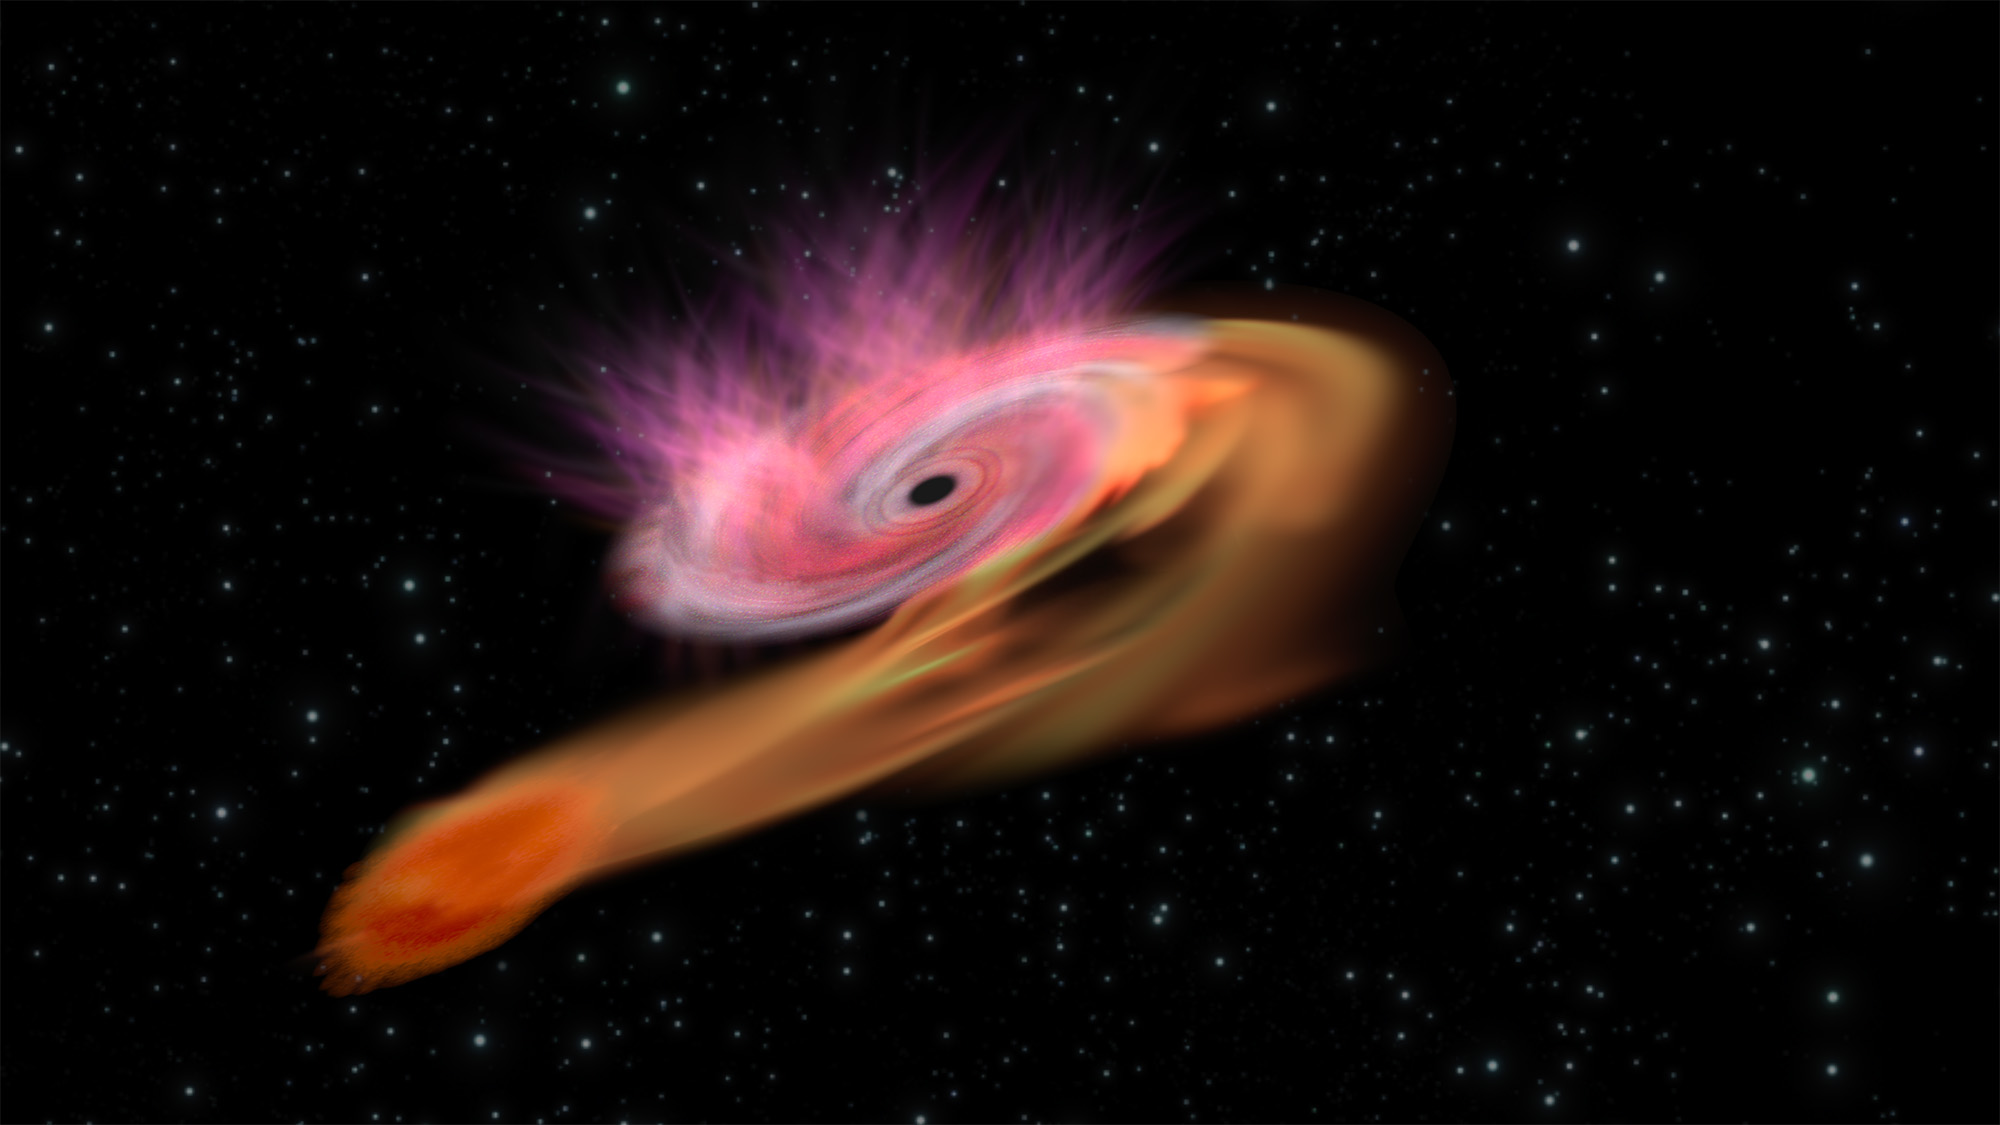 Artist's impression of the supermassive black hole at the centre of a galaxy accreting mass from a star that dared to venture too close to the galaxy's centre. This phenomenon is known as a tidal disruption event (Credit: ESA/C. Carreau)